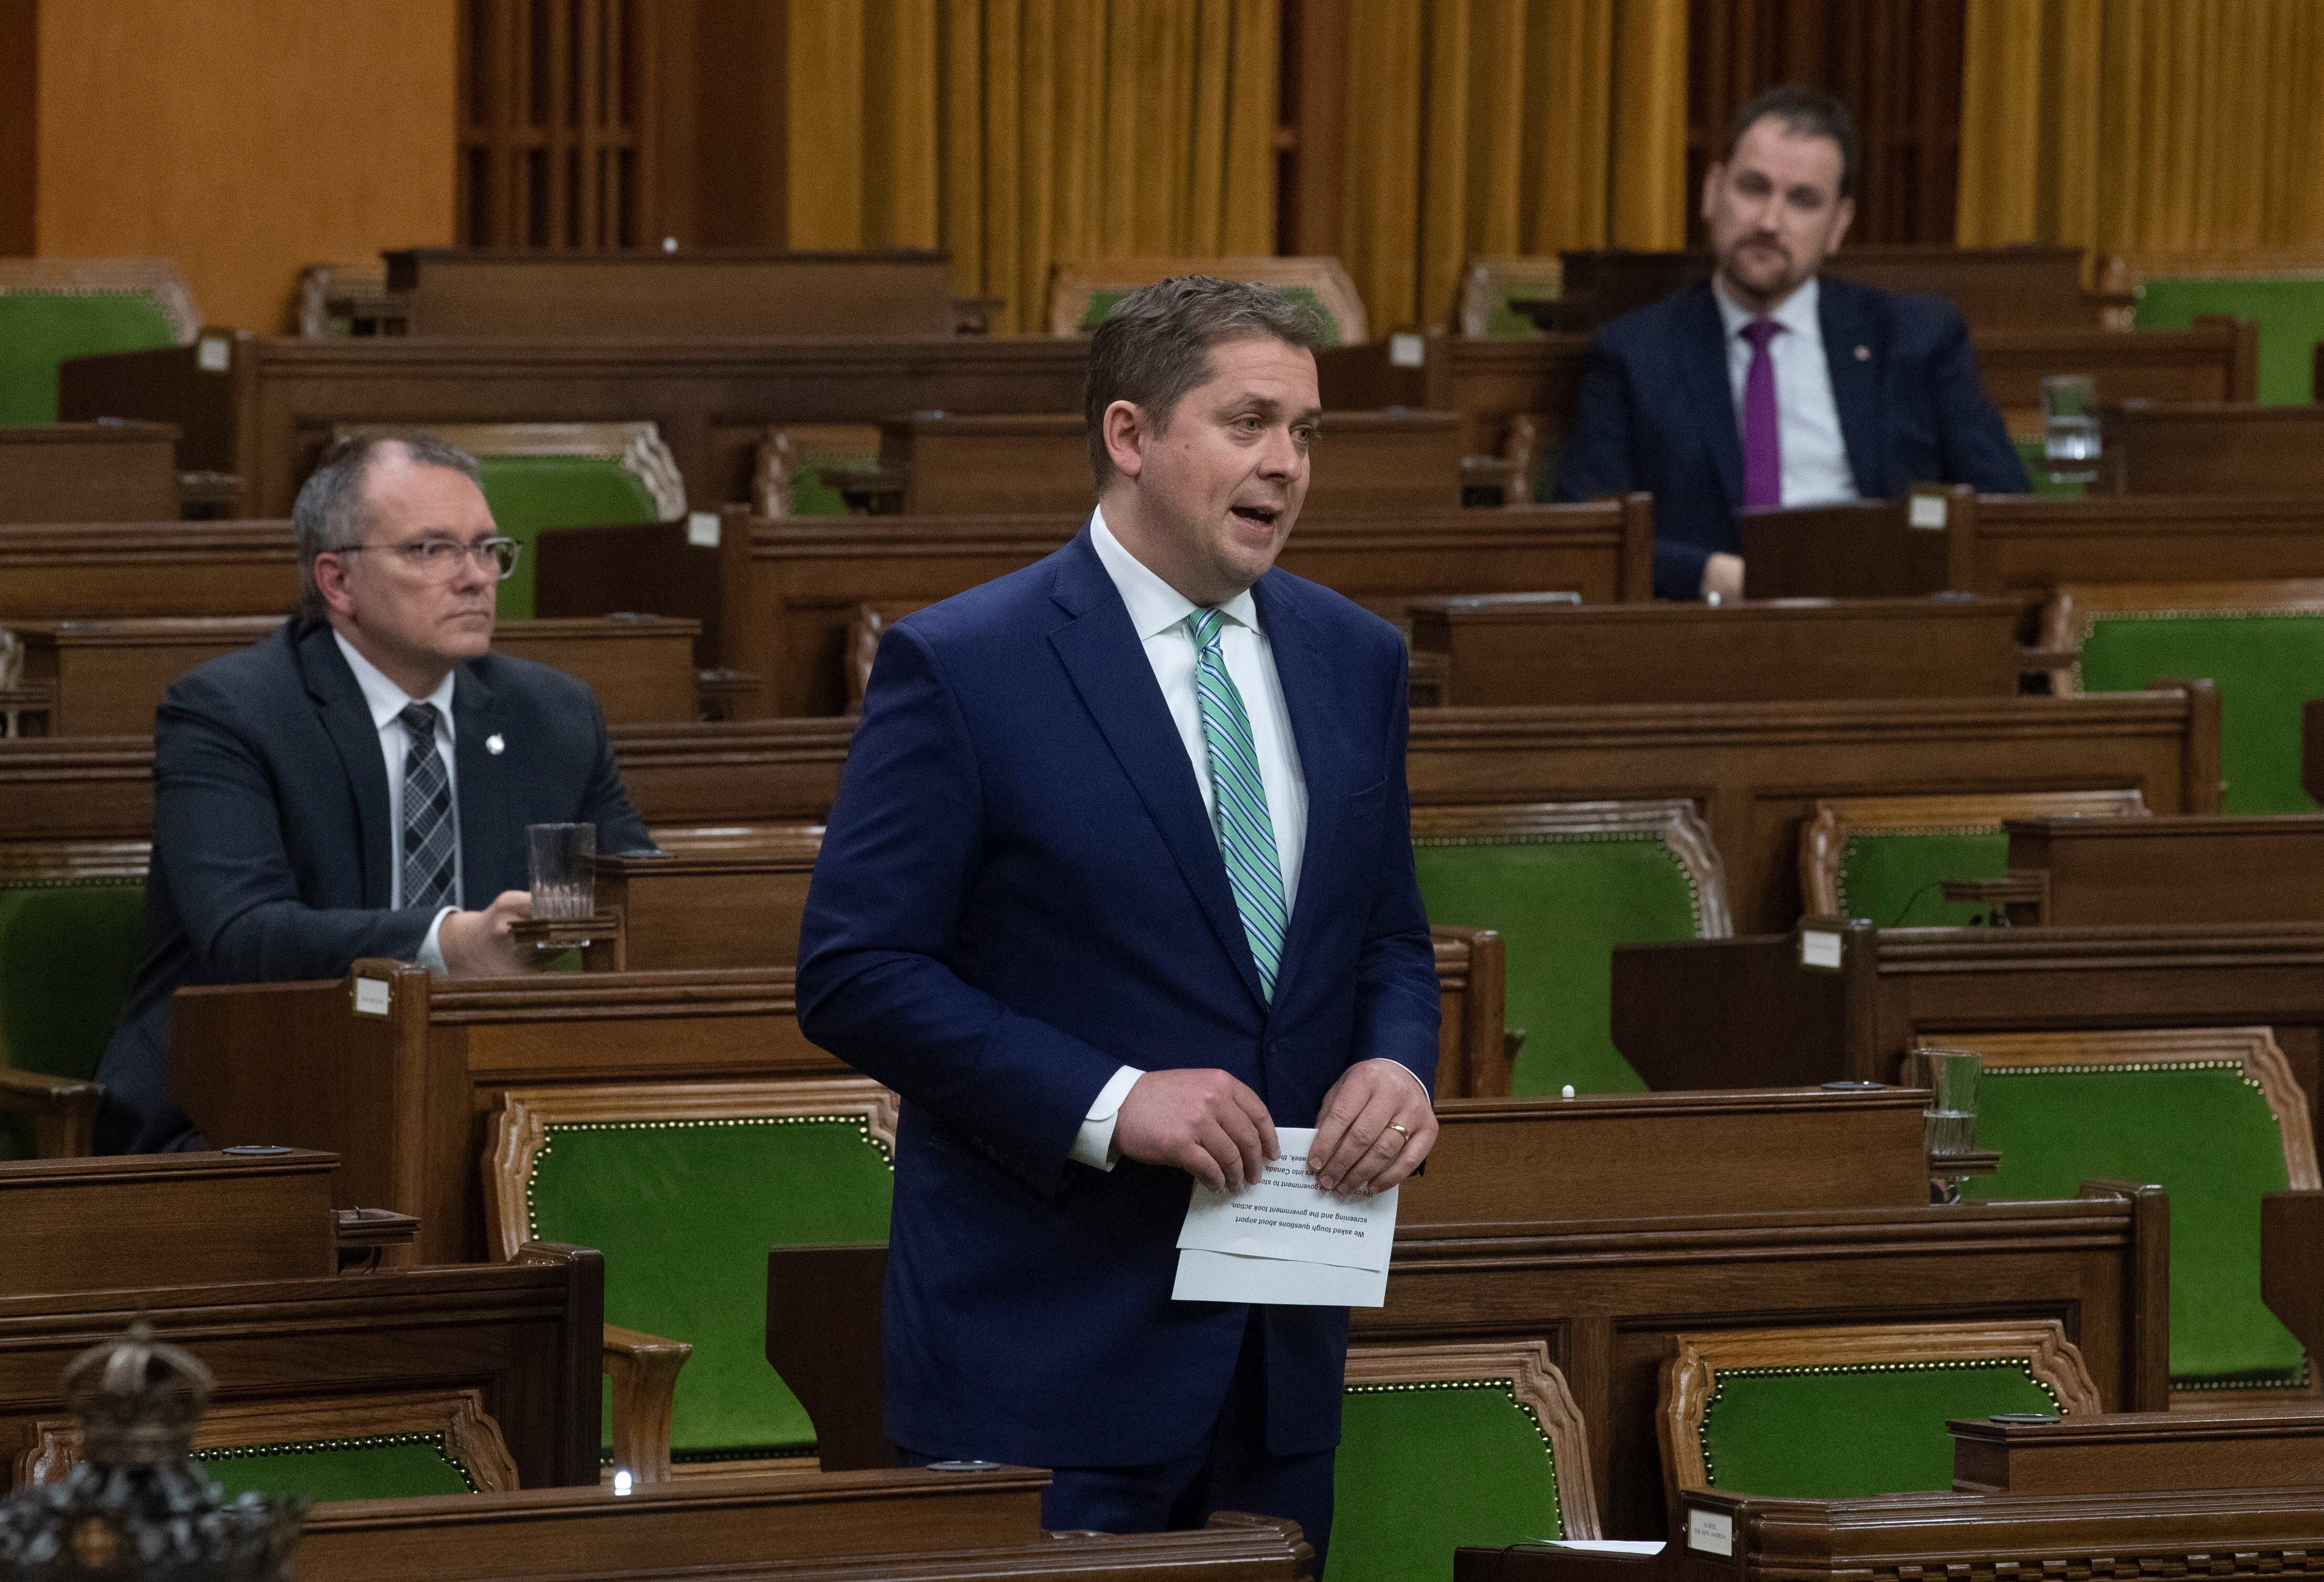 Scheer Calls For Increased Parliamentary Scrutiny Of Trudeau And